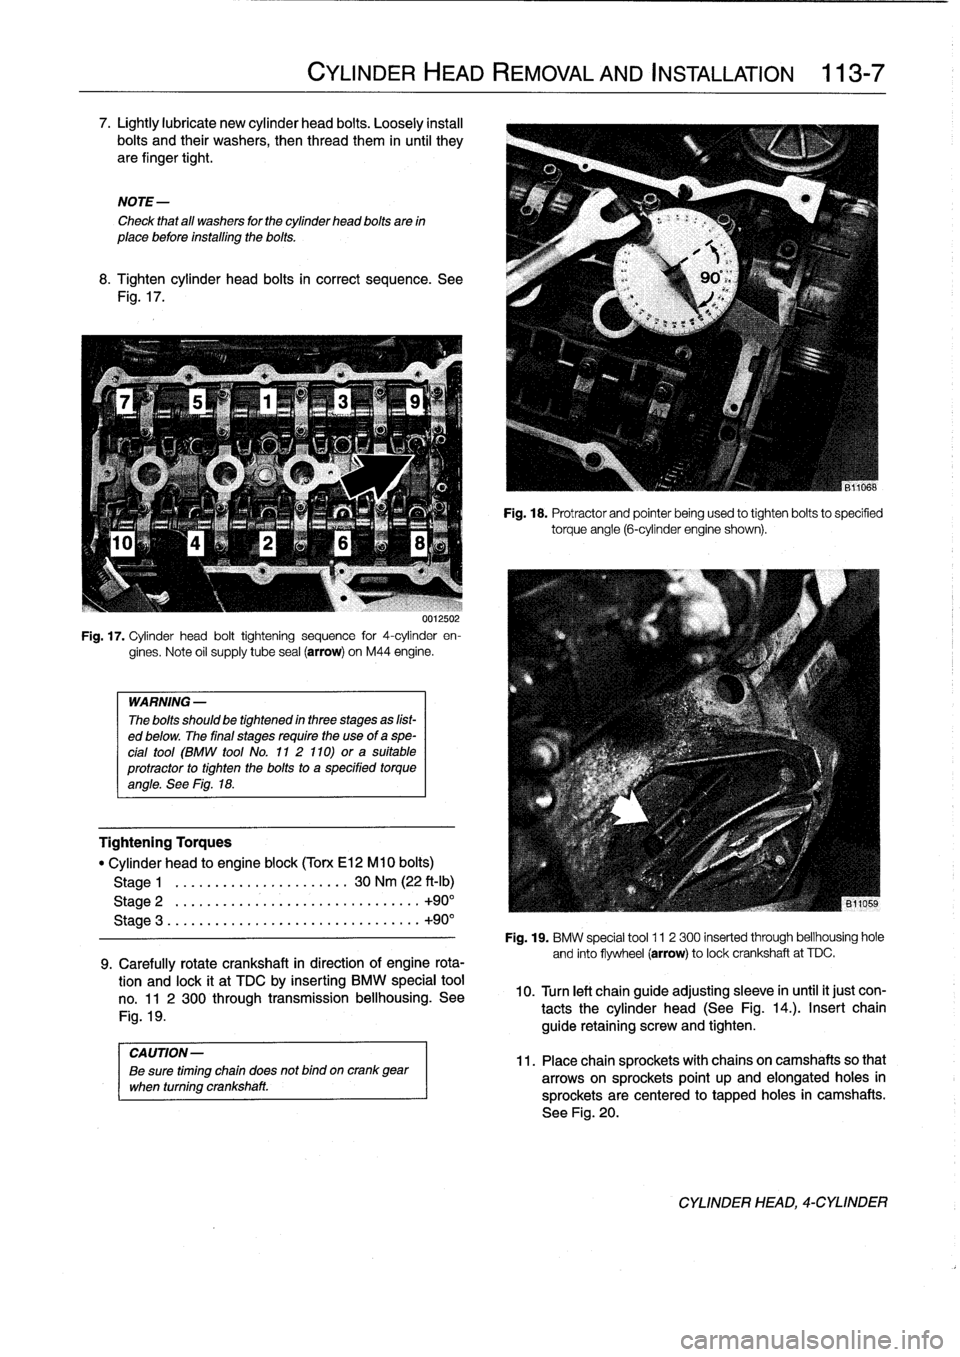 BMW 325i 1994 E36 Workshop Manual 
7
.
Lightly
lubricate
new
cylinder
head
bolts
.
Loosely
instan
bolts
and
their
washers,
then
thread
them
in
until
they
are
finger
tight
.

NOTE-

Check
that
all
washers
for
the
cylinder
head
bolts
ar